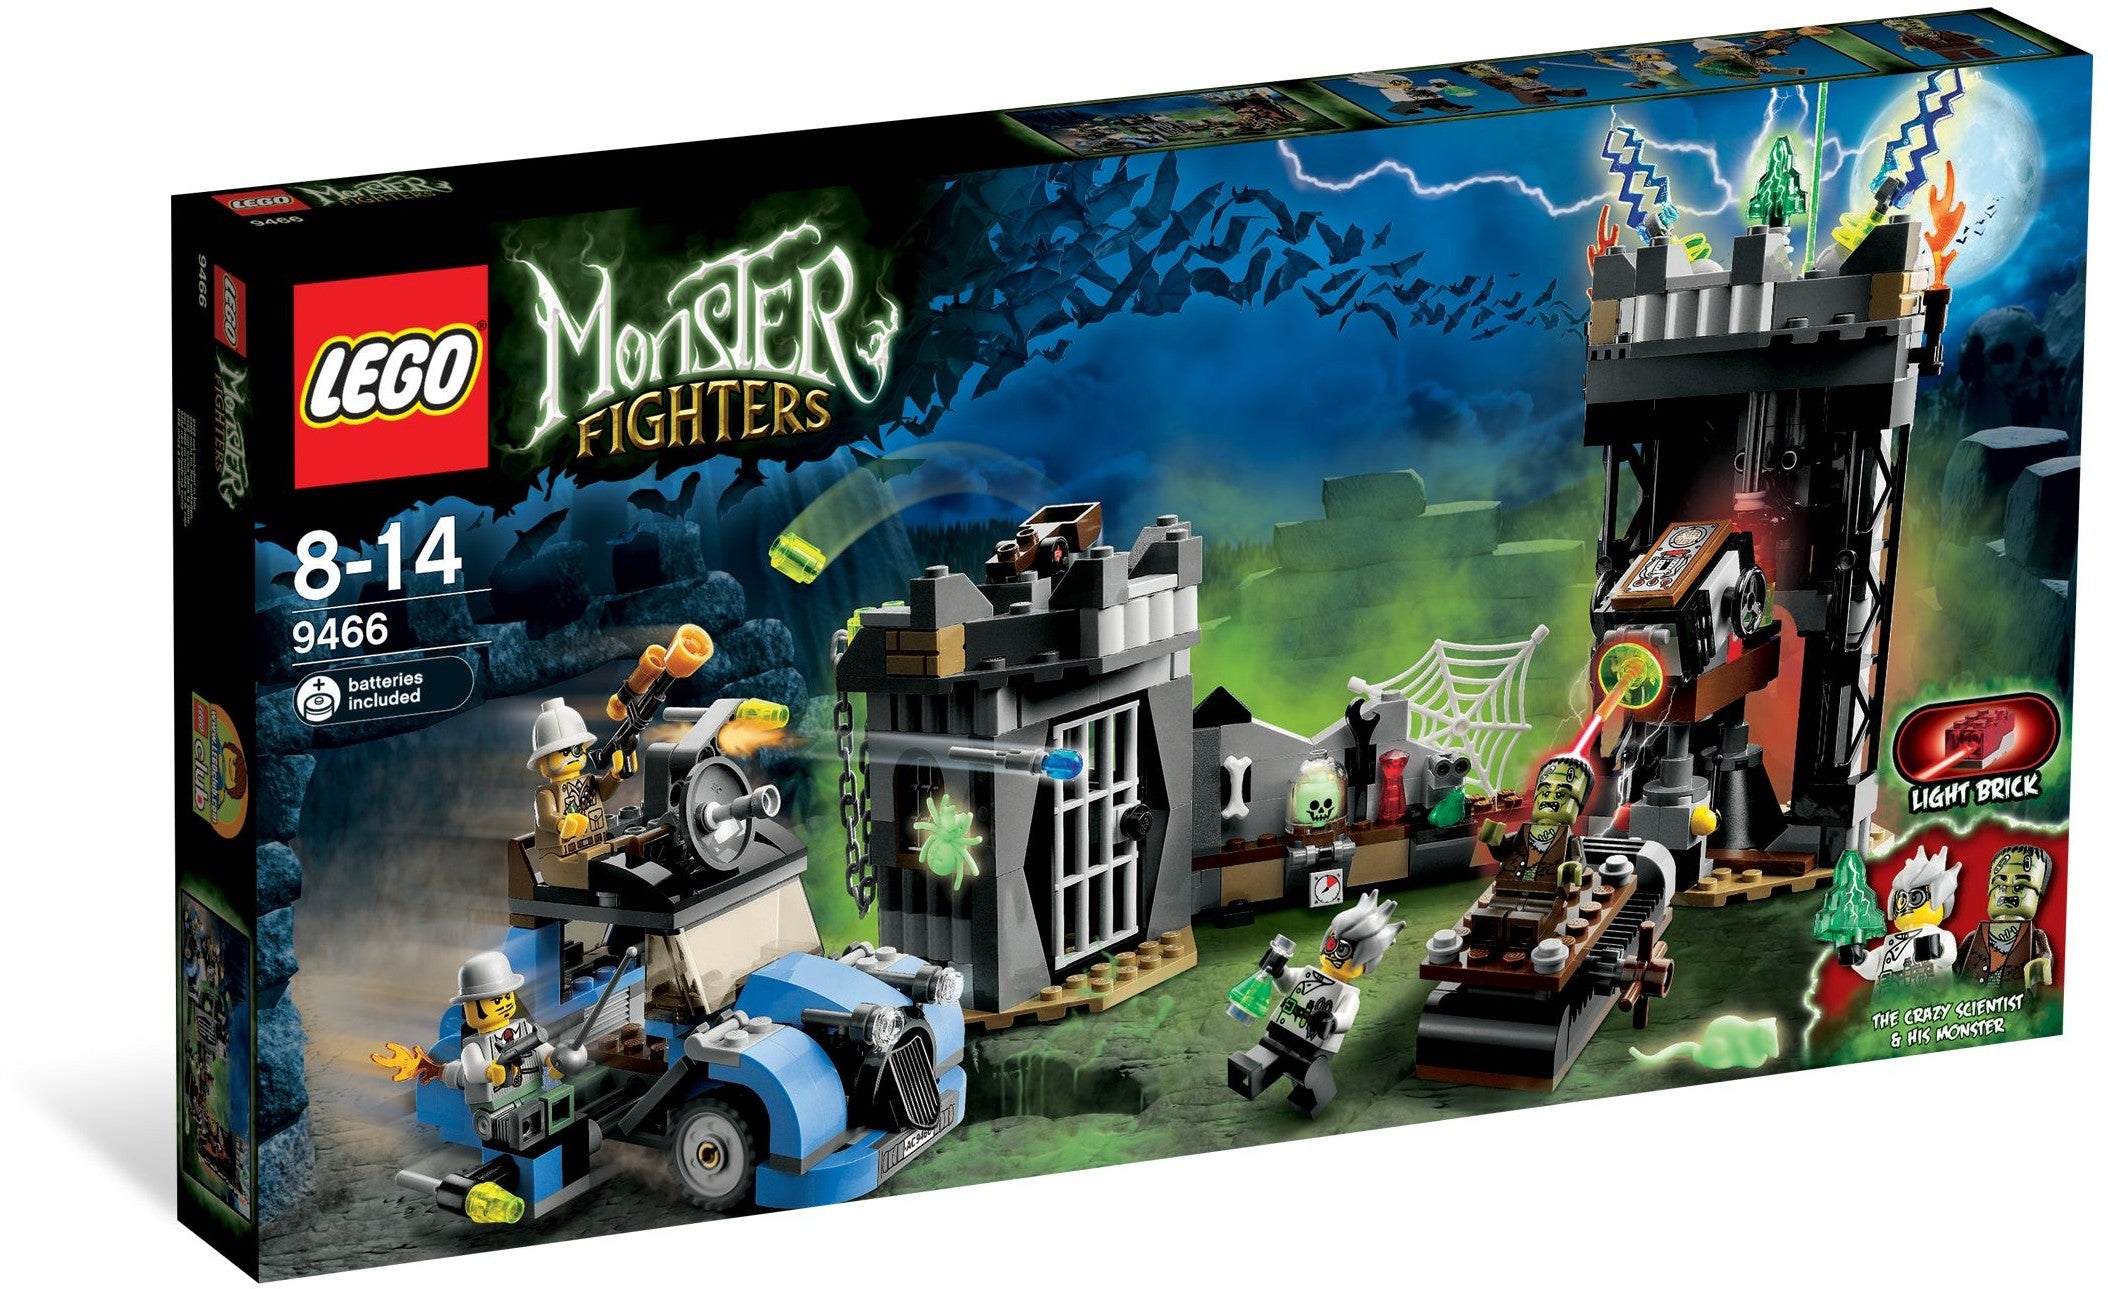 Lego Monster Fighters 9466 - Crazy Scientist & His Monster